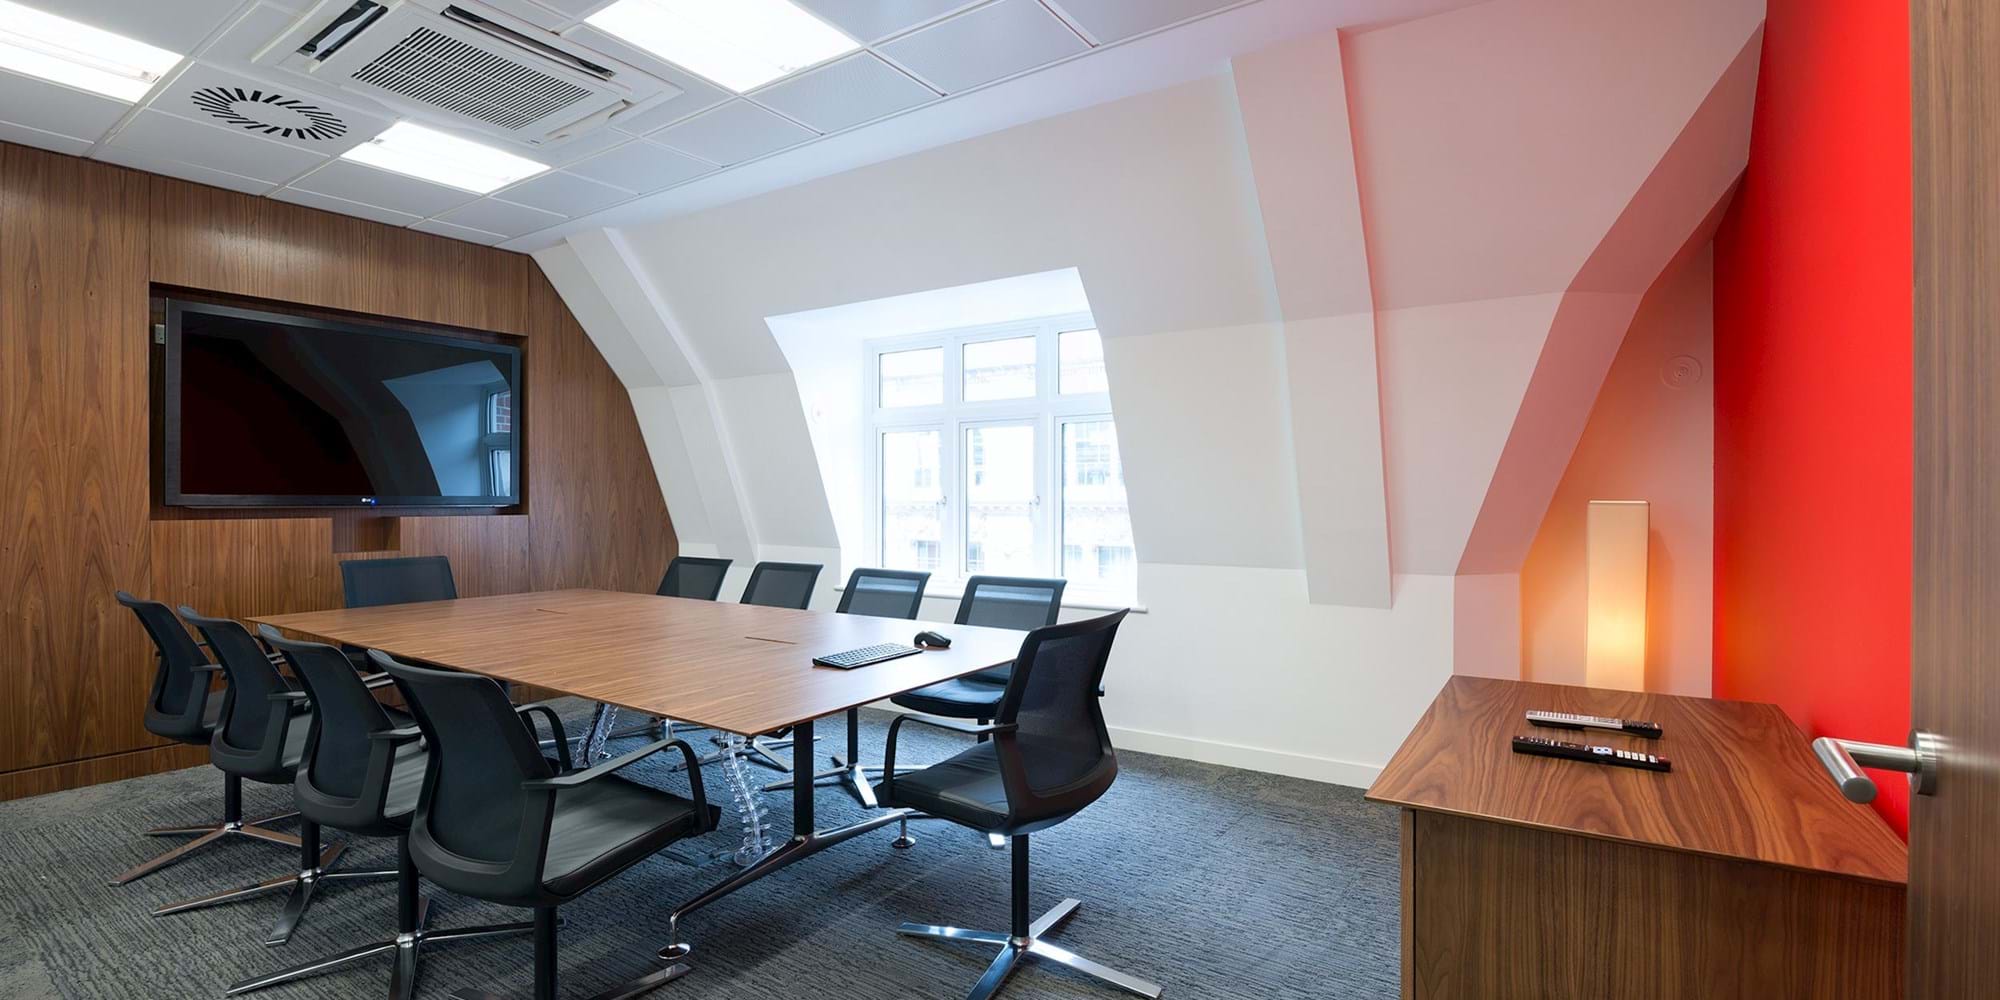 Modus Workspace office design, fit out and refurbishment - MIG Capital - Meeting Room - Mig_Capital 01_highres_sRGB.jpg